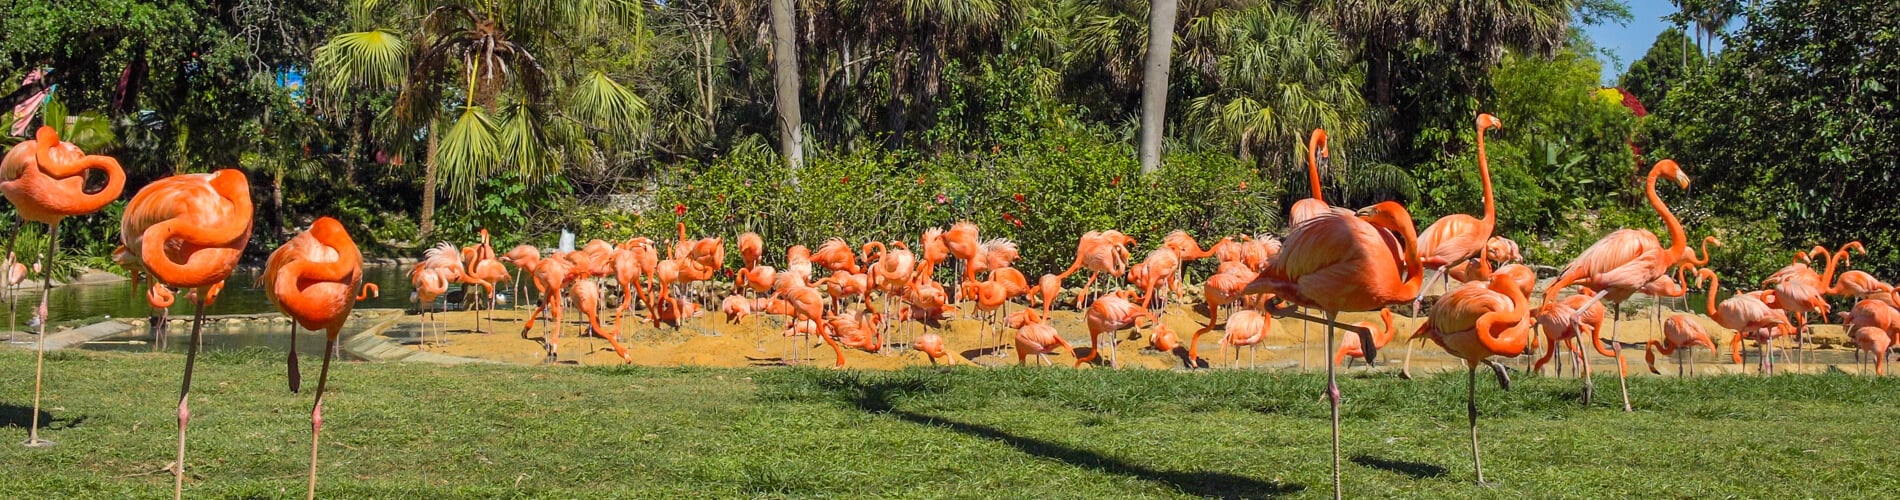 Flamingos and Other Birds at Busch Gardens Tampa Bay